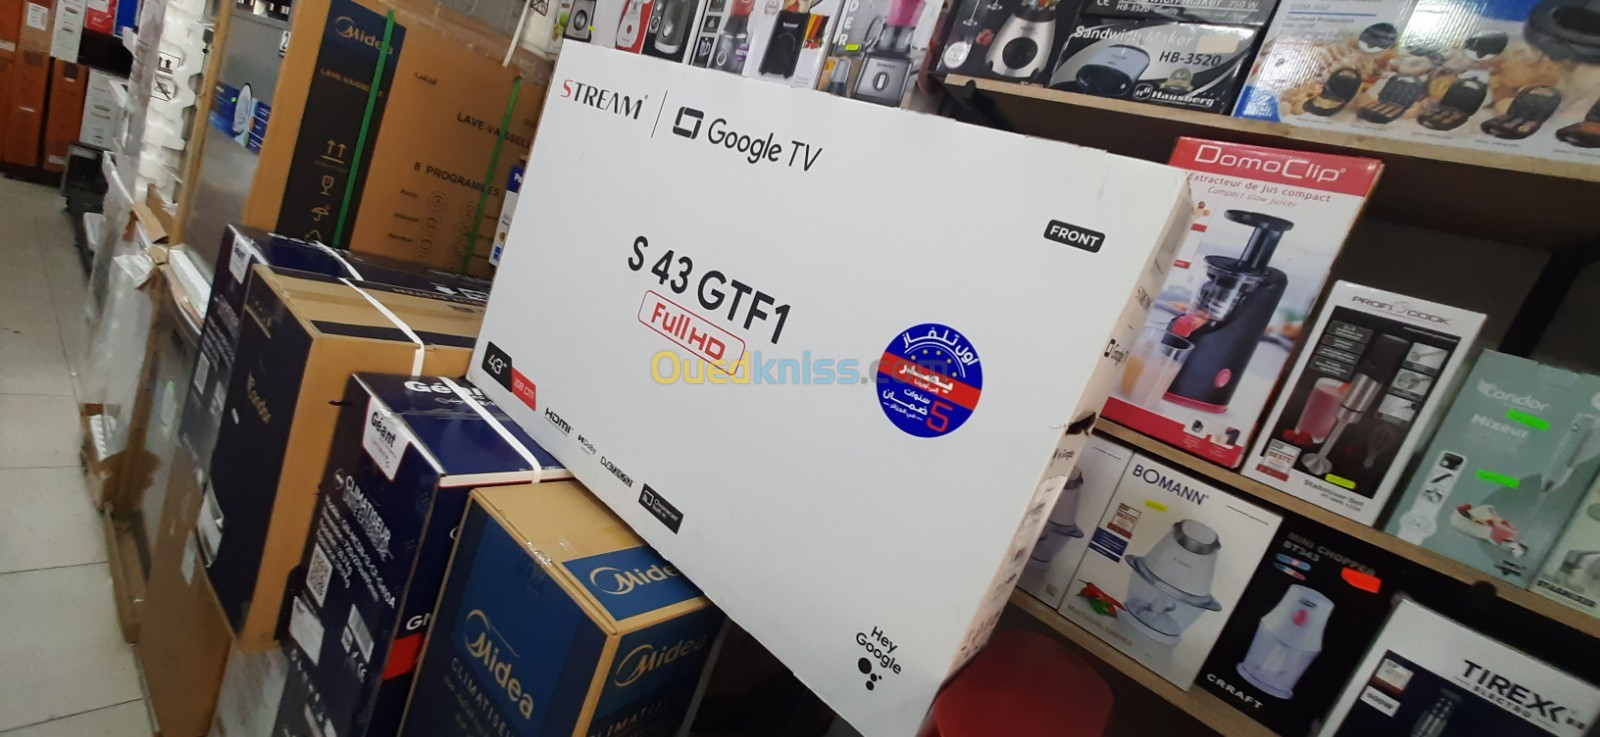 PROMOTION TV STREAM 43 GOOGLE TV (NEW 2023) S43GTF1 ANDROID 11 FULL HD